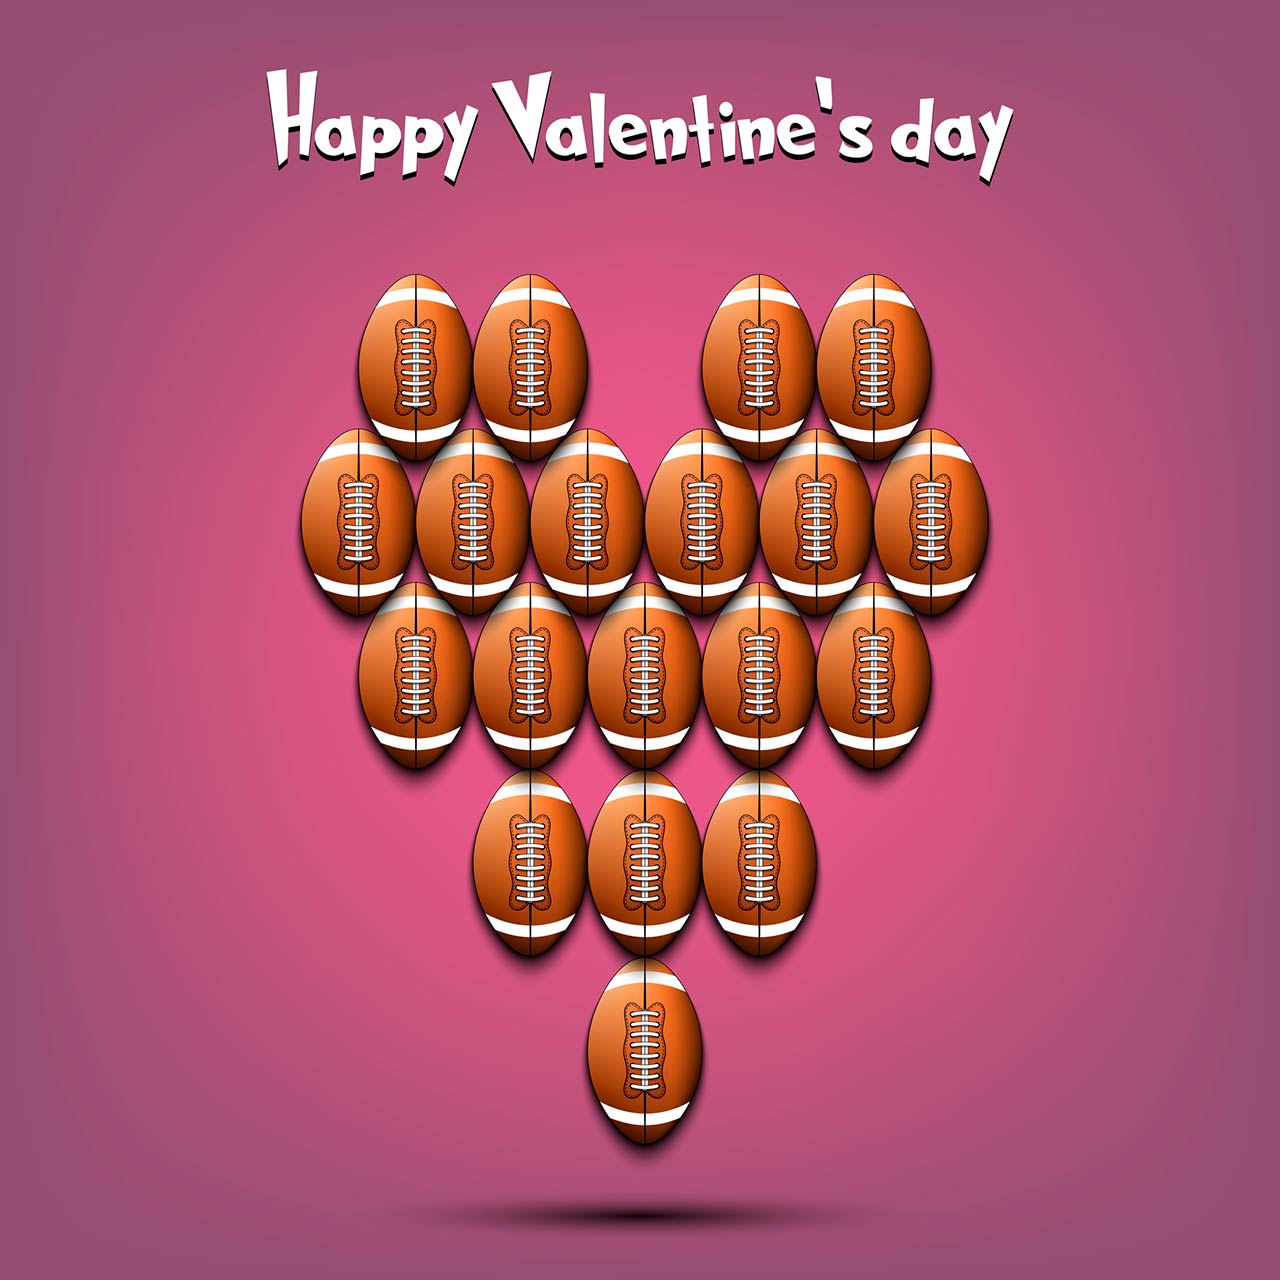 Happy Valentine's Day image with a heart made of footballs